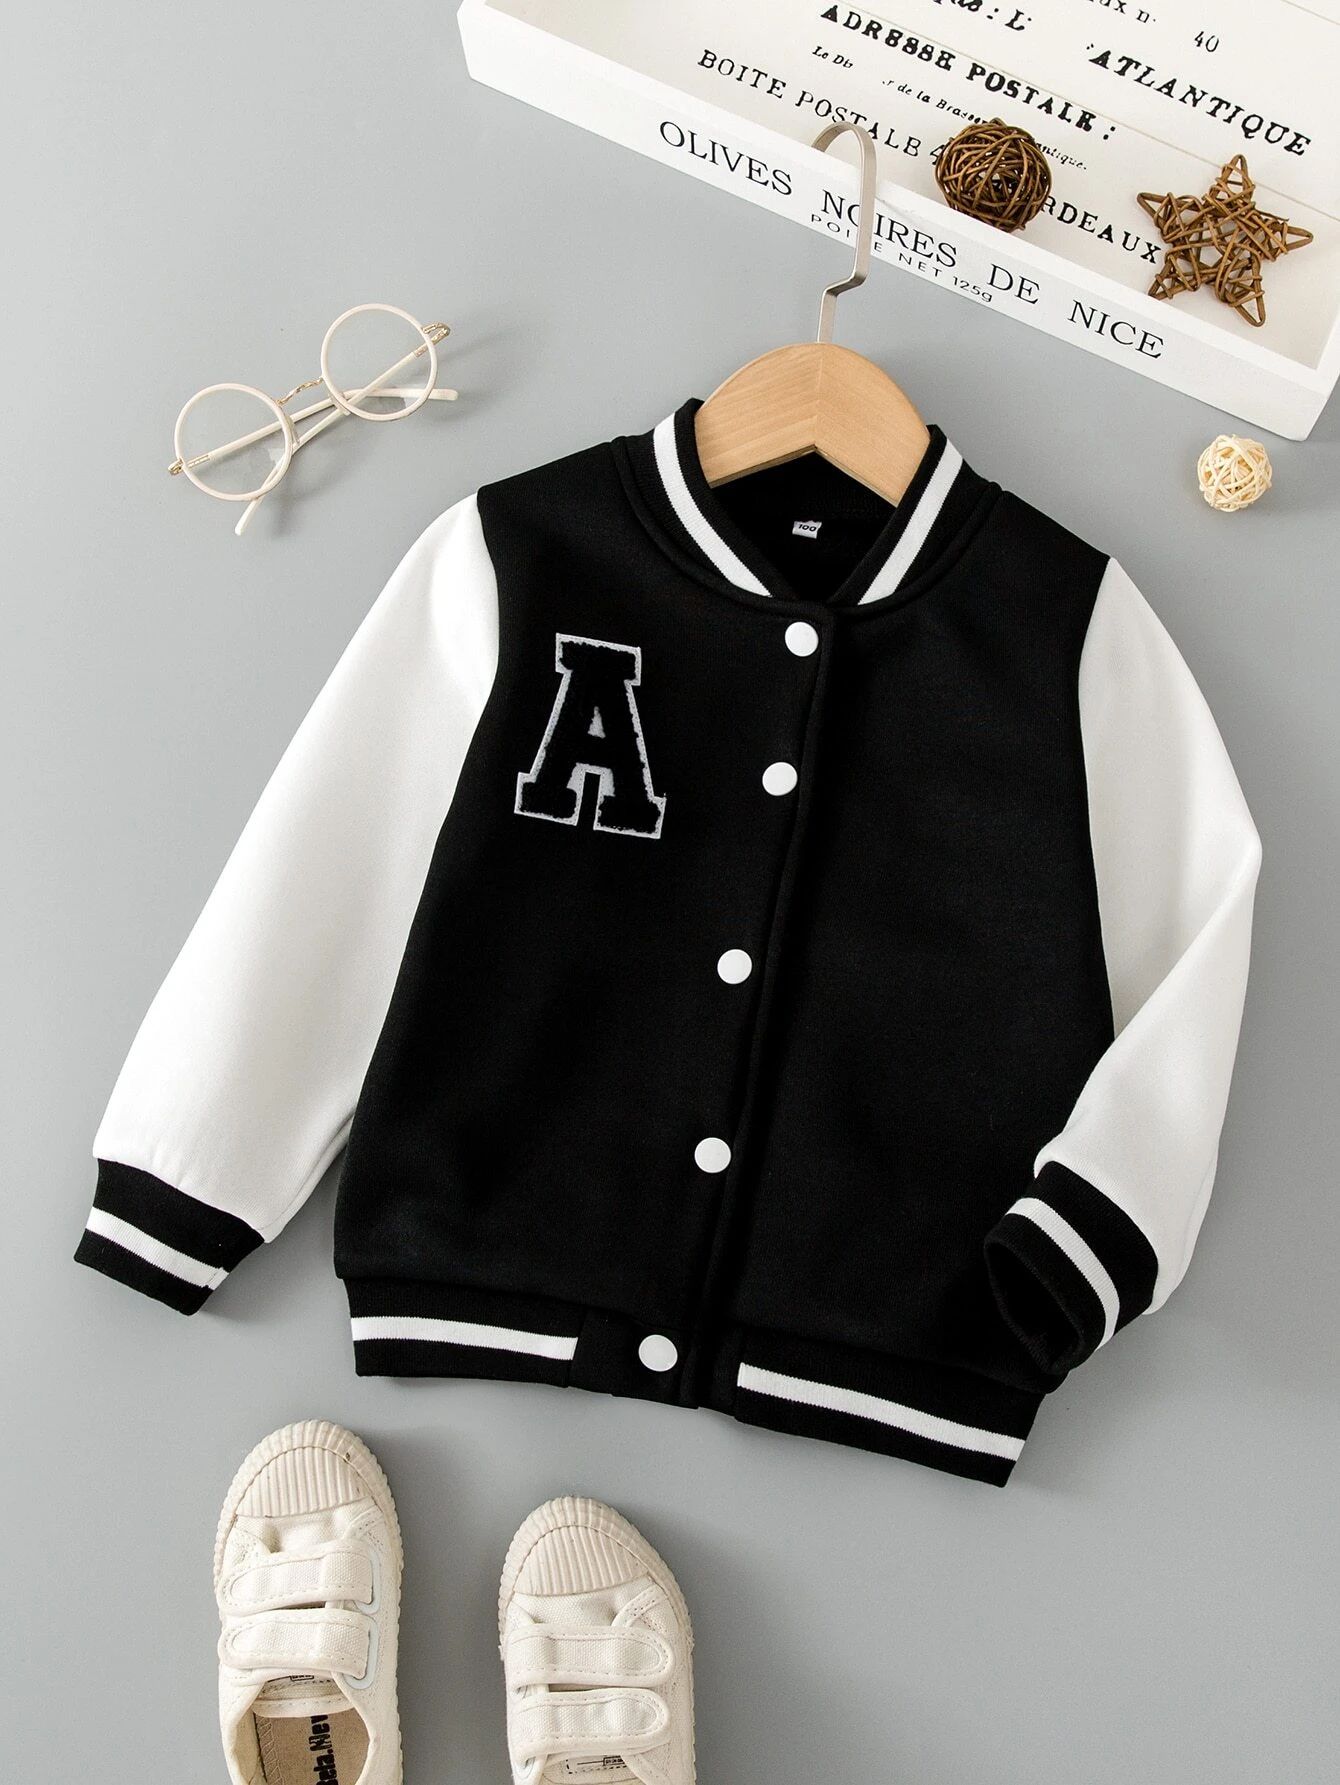 SHEIN Kids Academe Toddler Boys Letter Patched Thermal Varsity Jacket | SHEIN